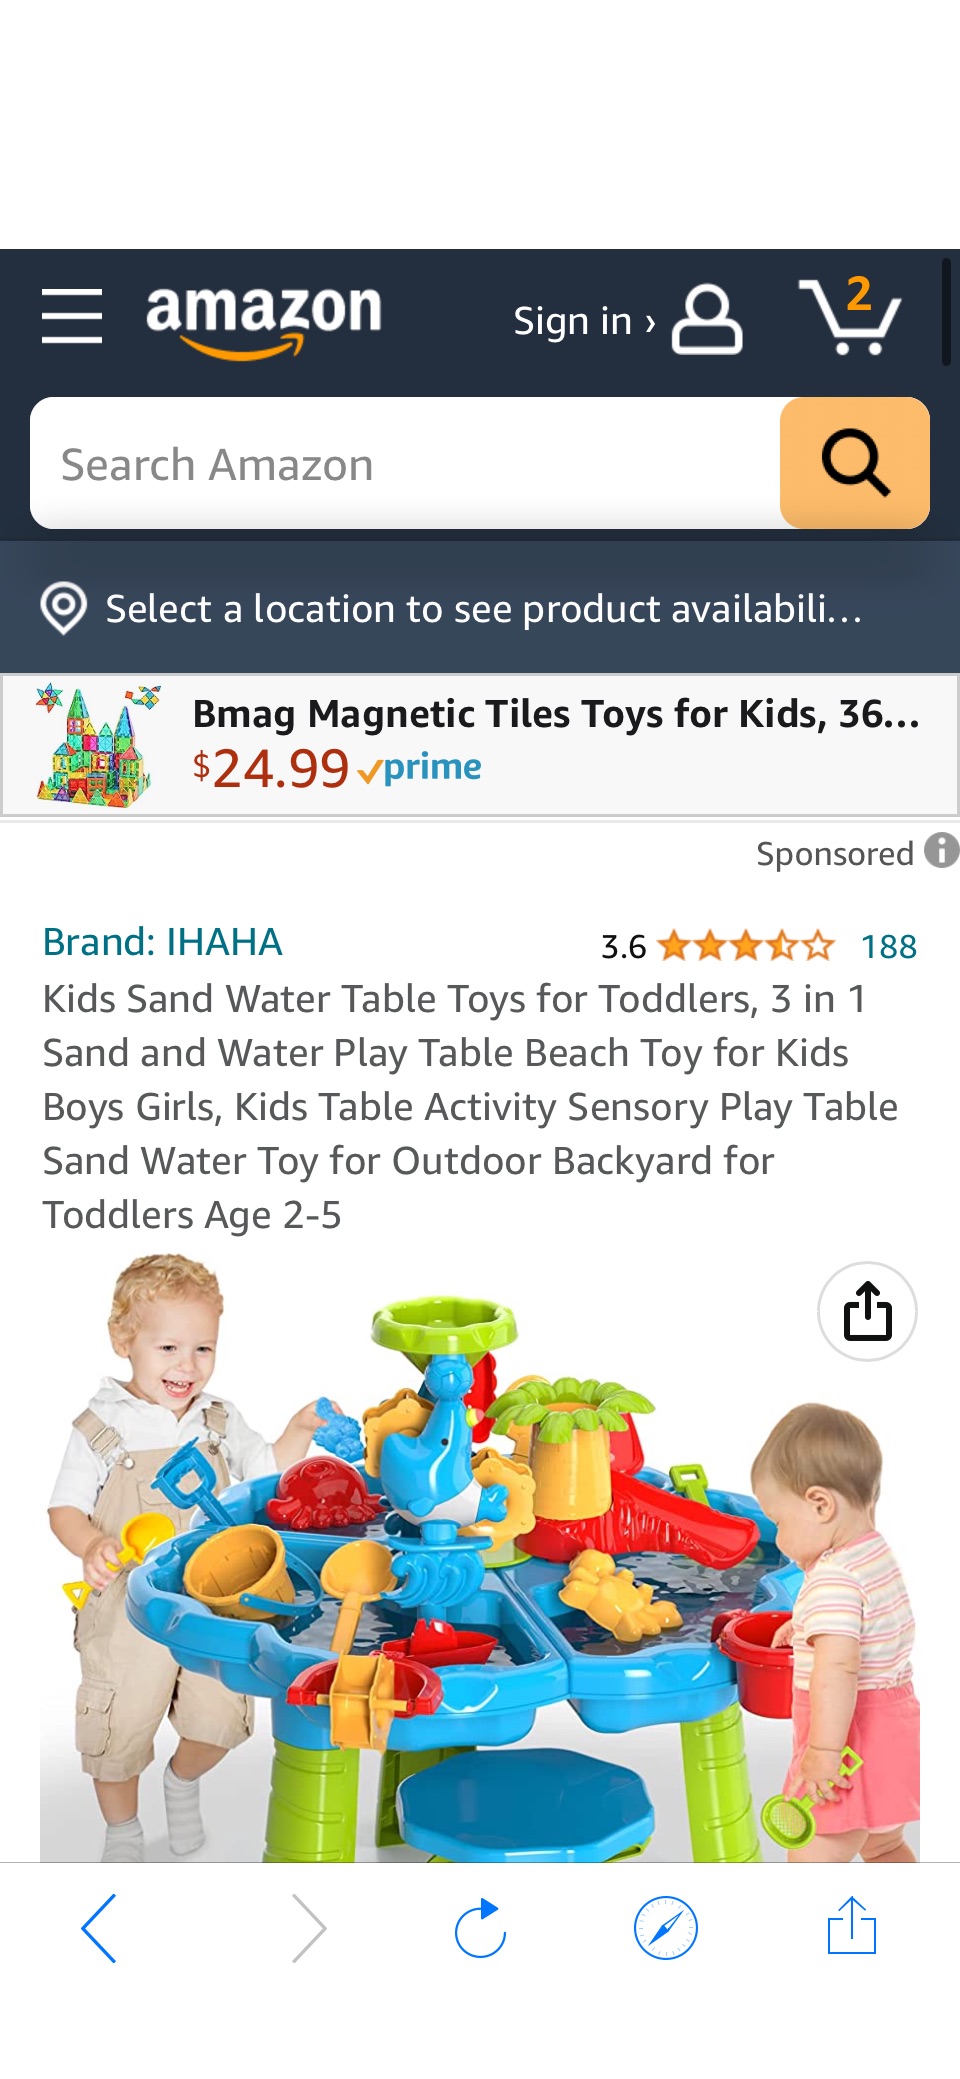 Amazon.com: Kids Sand Water Table Toys for Toddlers, 3 in 1 Sand and Water Play Table Beach Toy for Kids Boys Girls, Kids Table Activity Sensory Play原价99.99